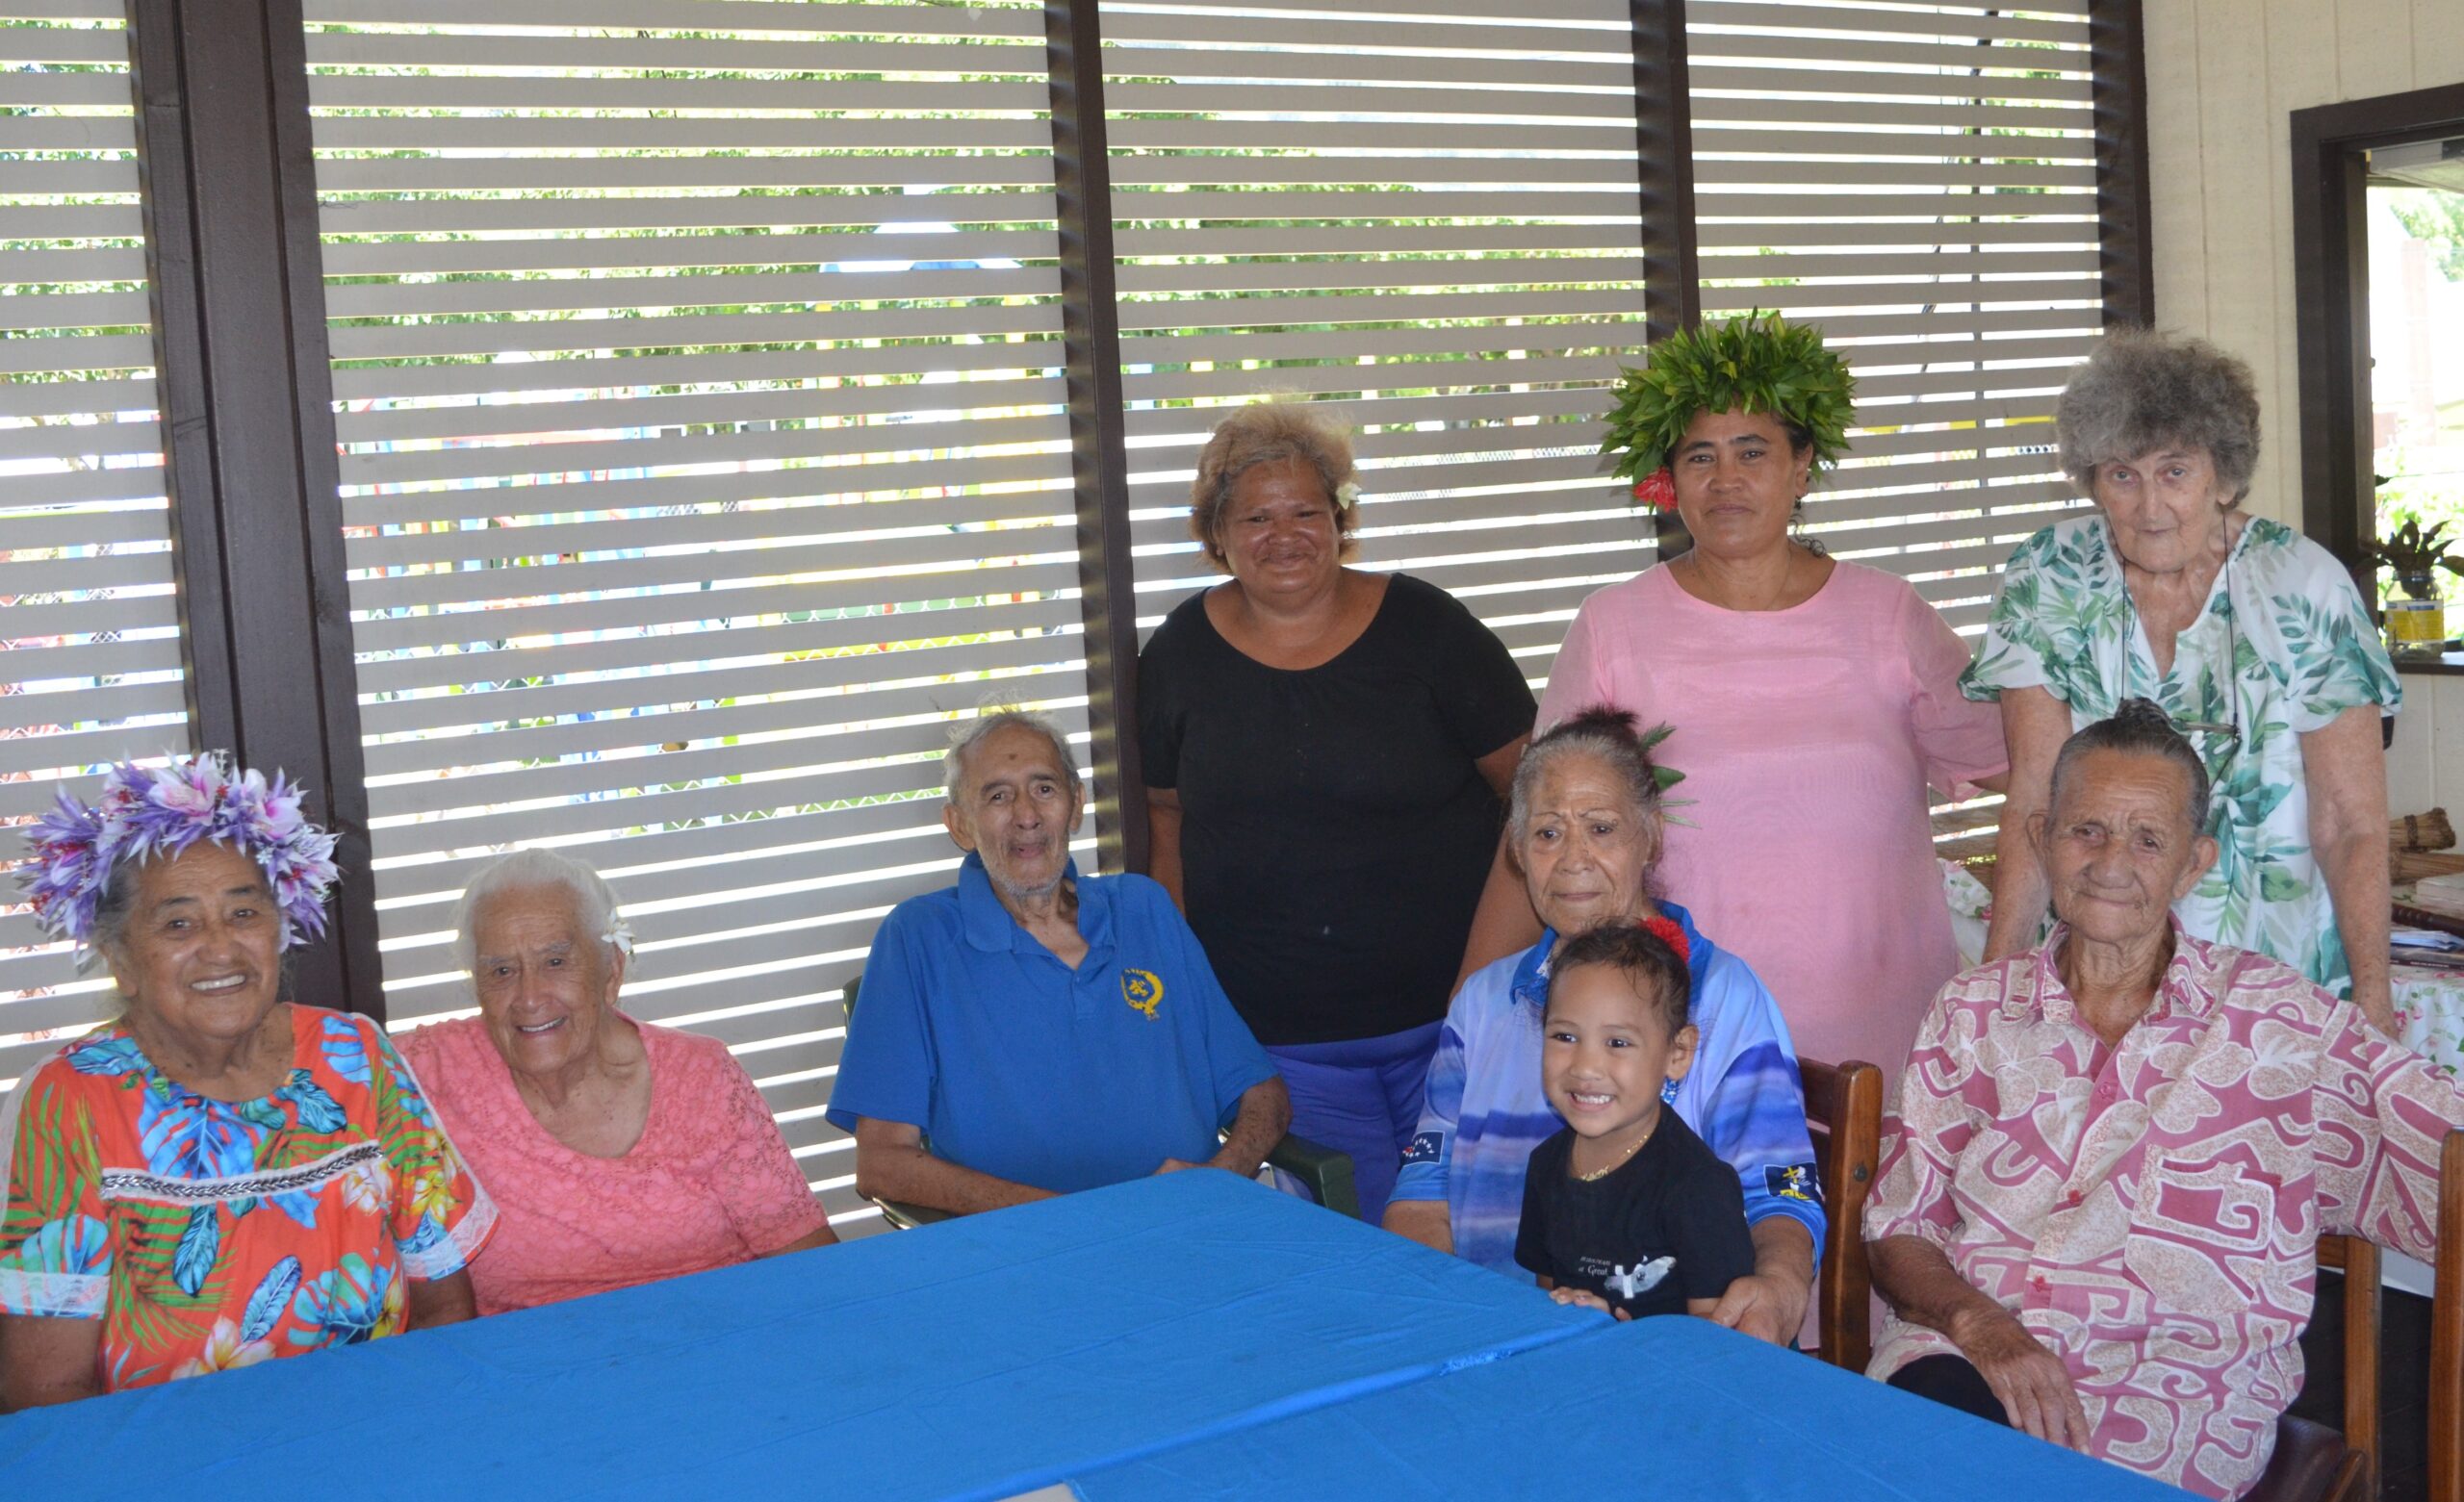 Te Are Pa Metua welcomes back seniors for activities and socialisation